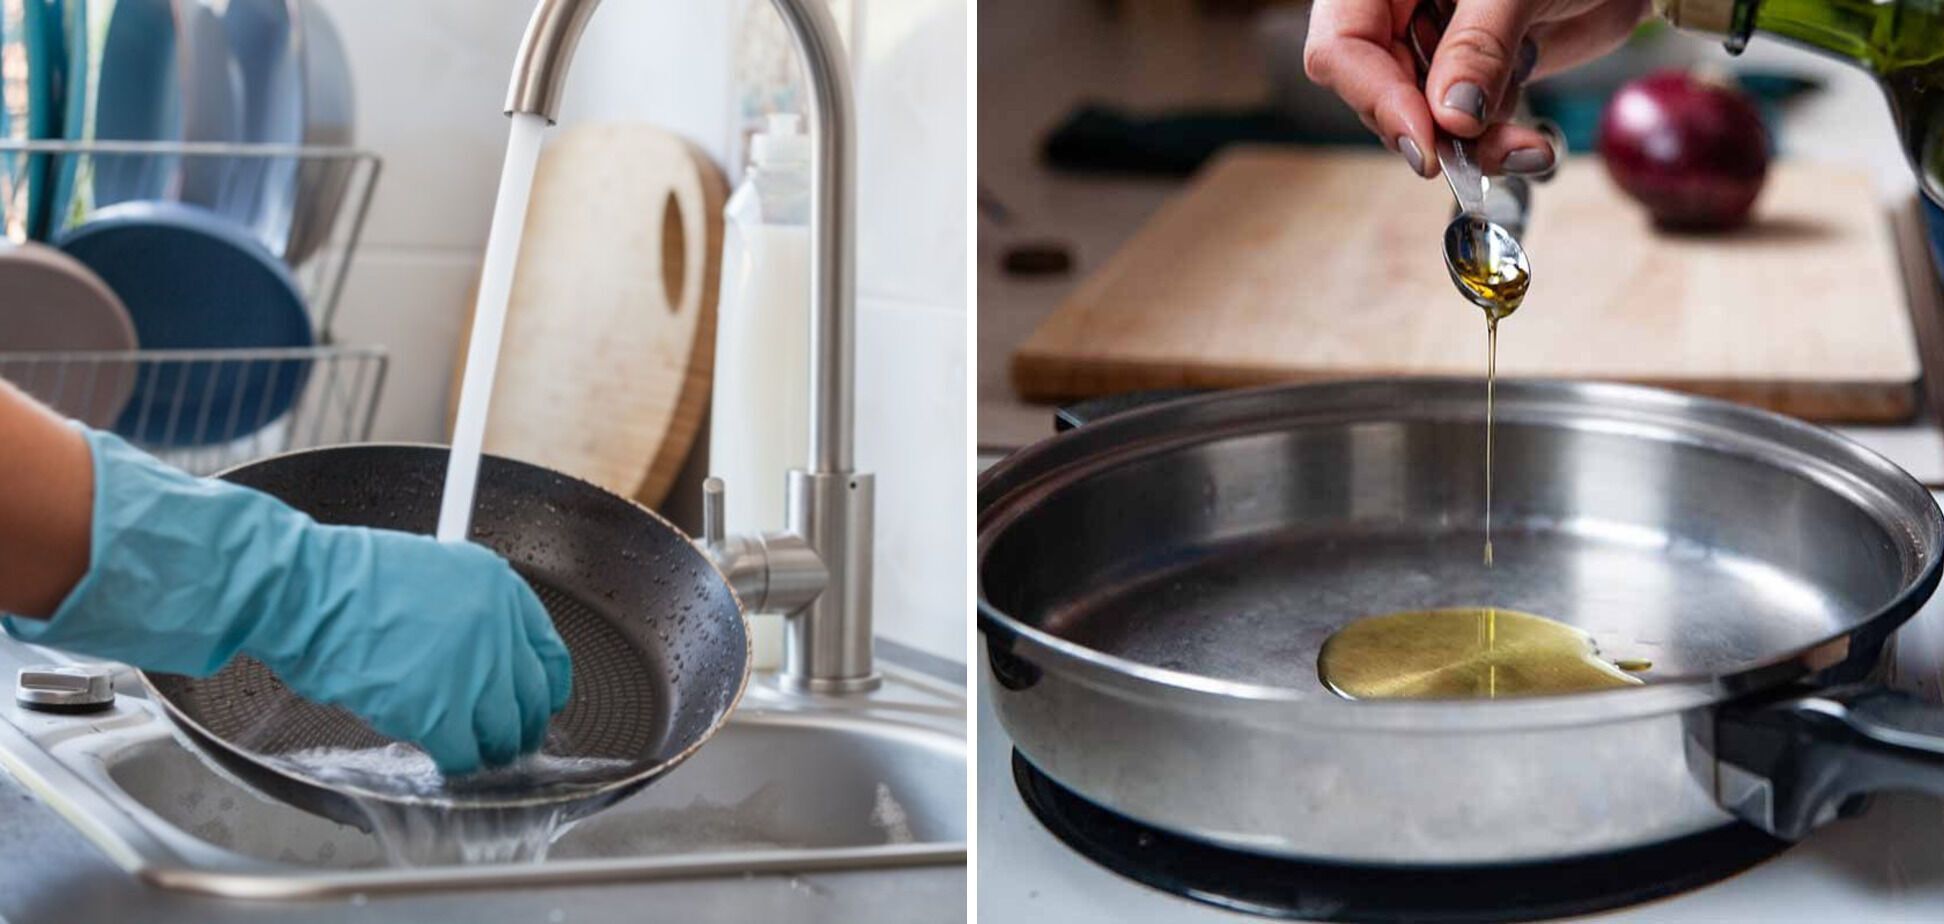 How to properly wash pans and pots